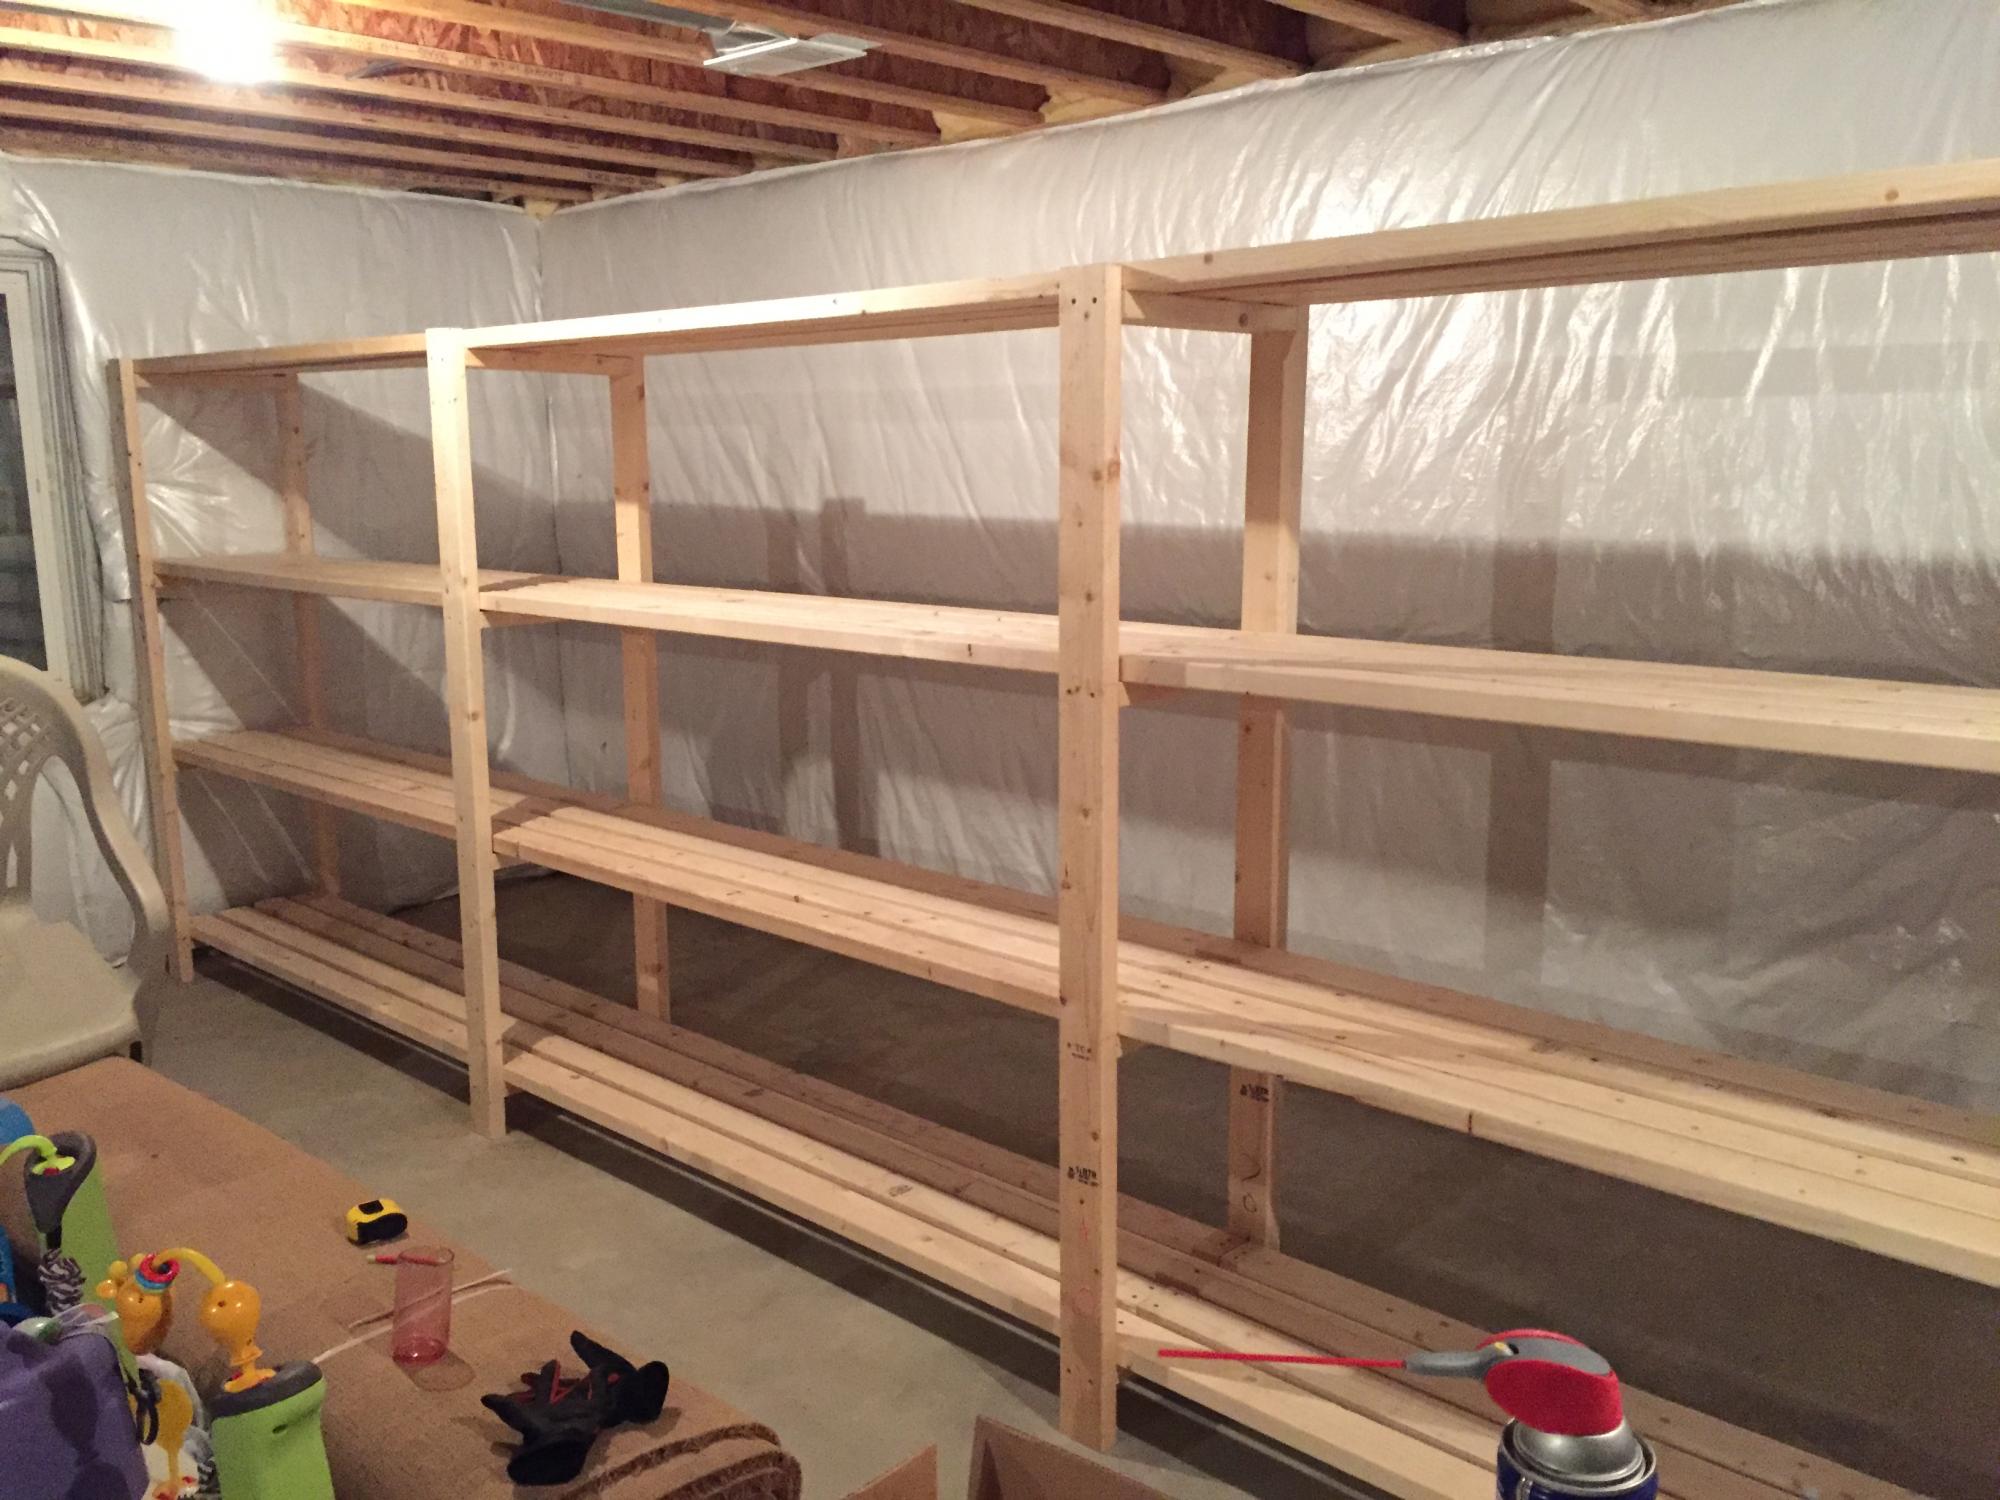 How to Build Storage Shelves for a Basement